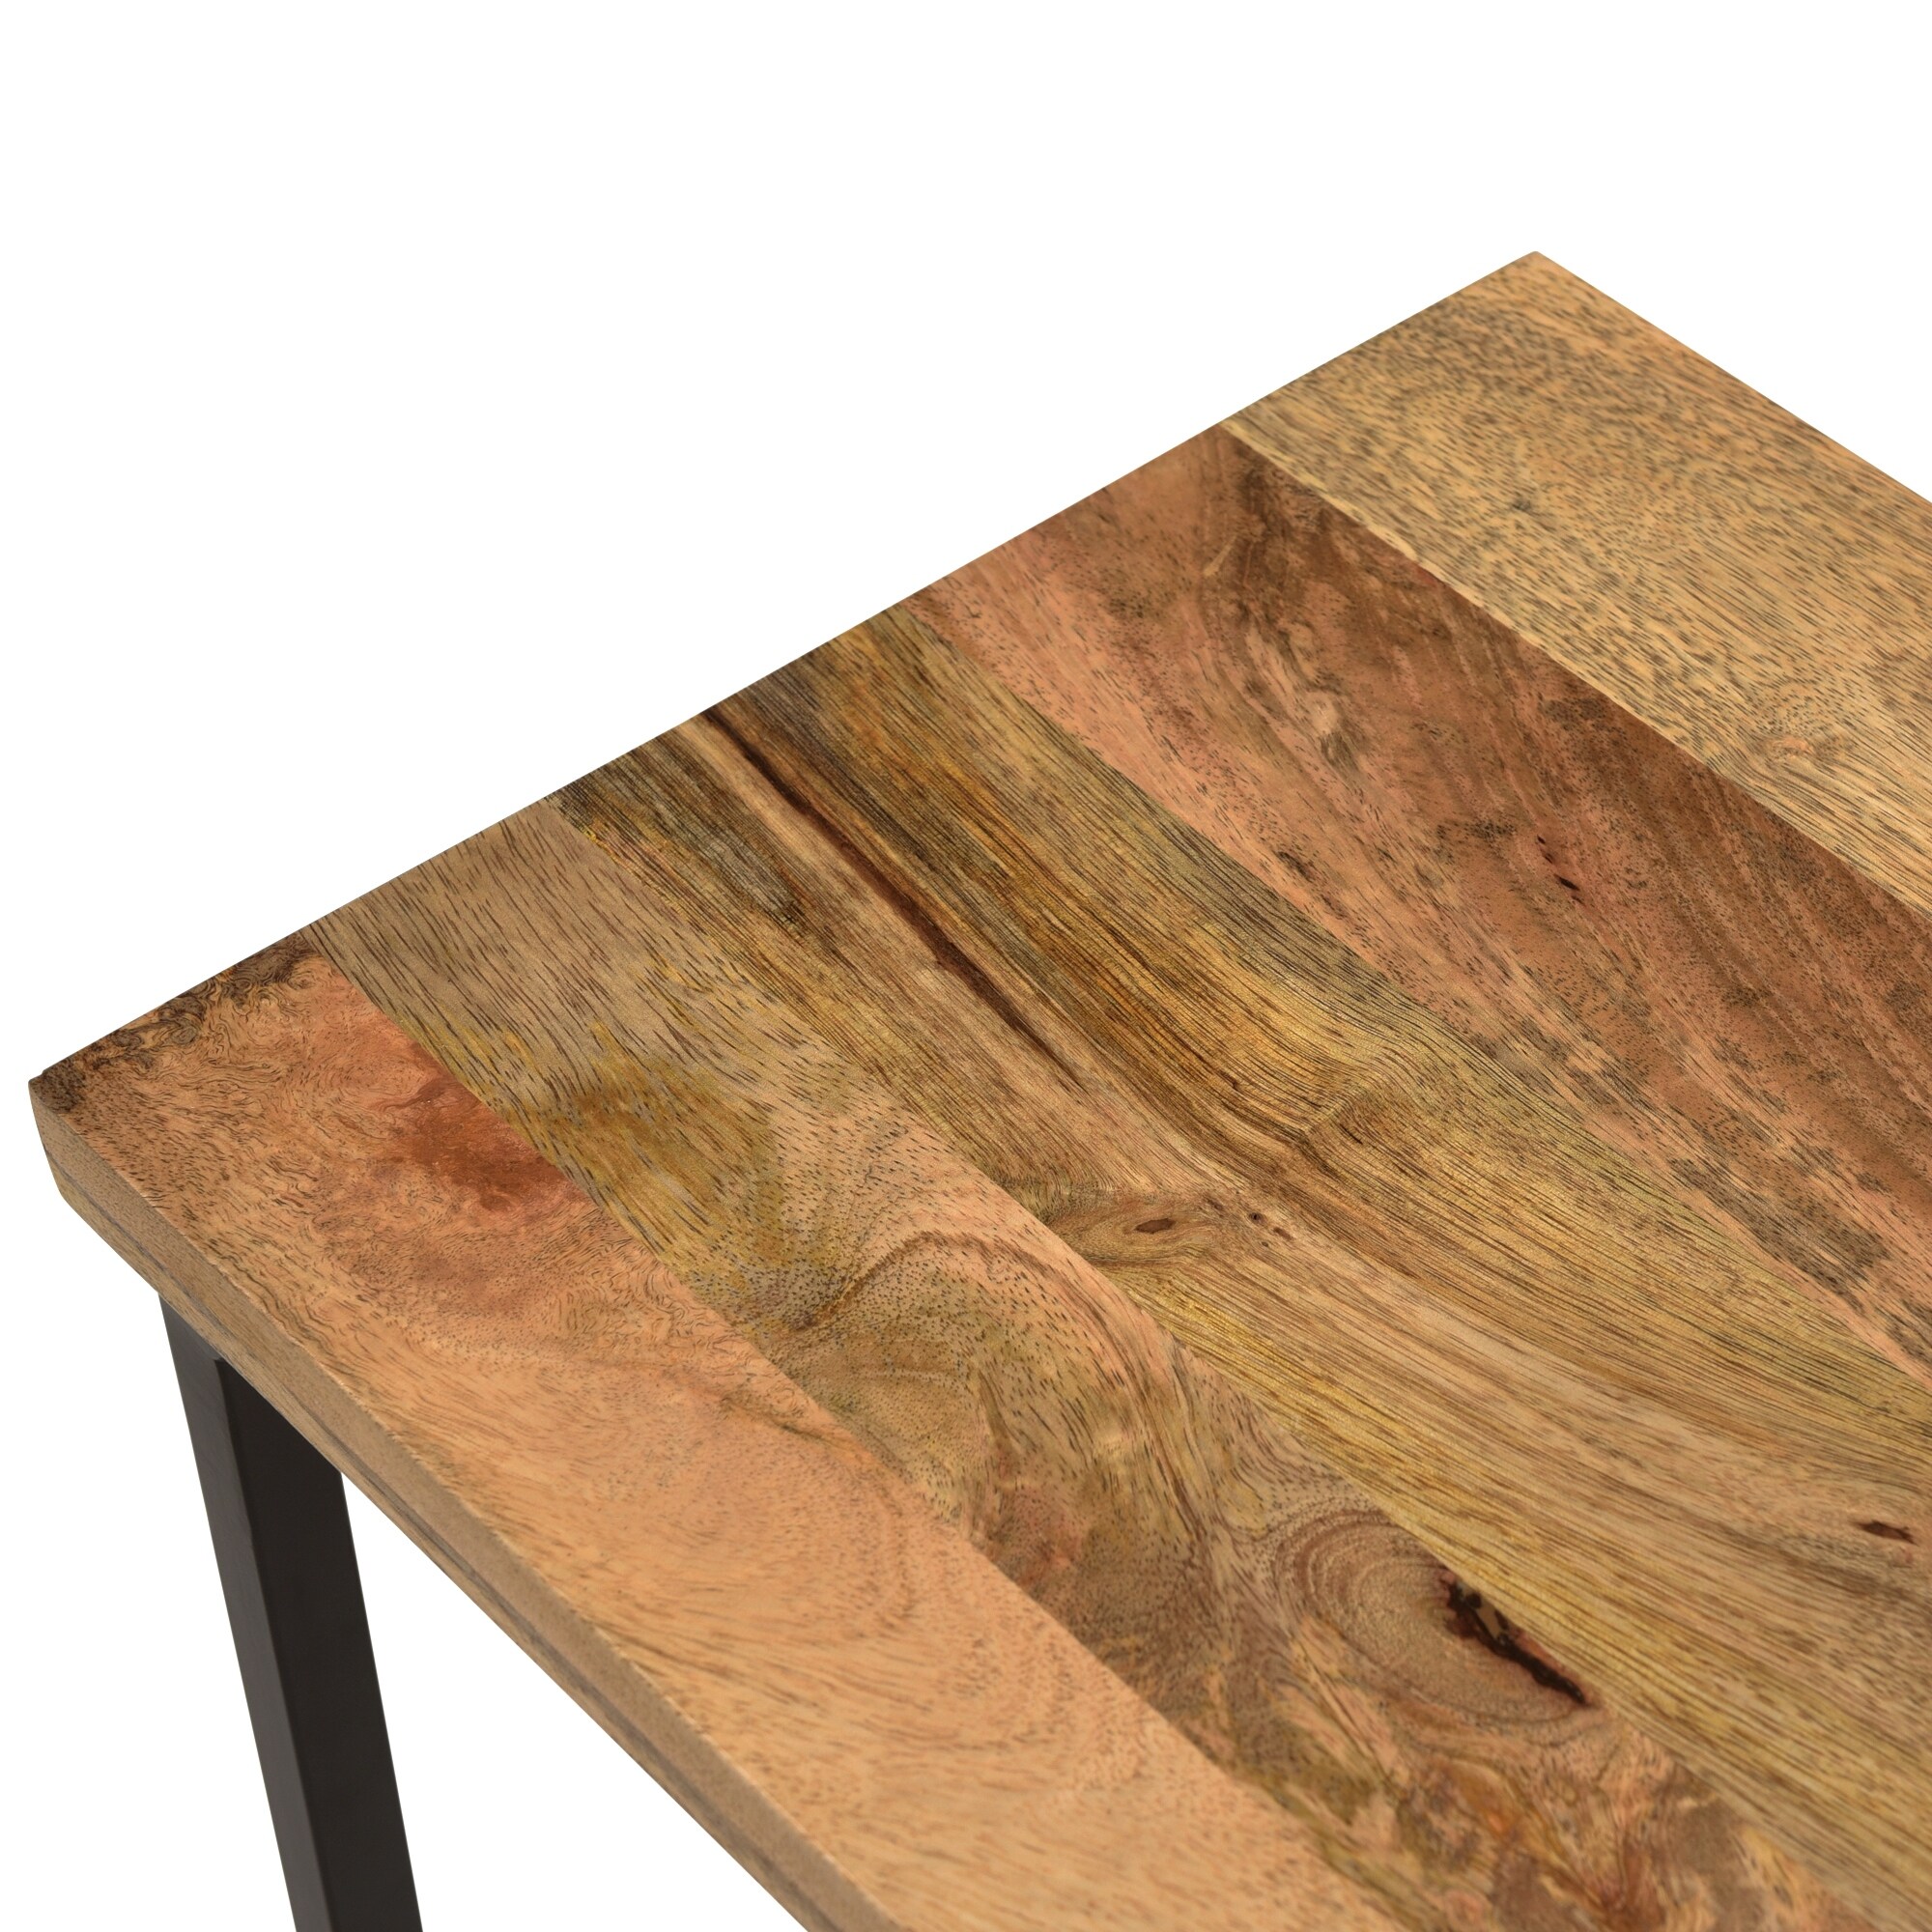 Natural Eli C Side Table FirsTime & Co Modern Style 18 x 14 x 26.25 inches Natural Wood 